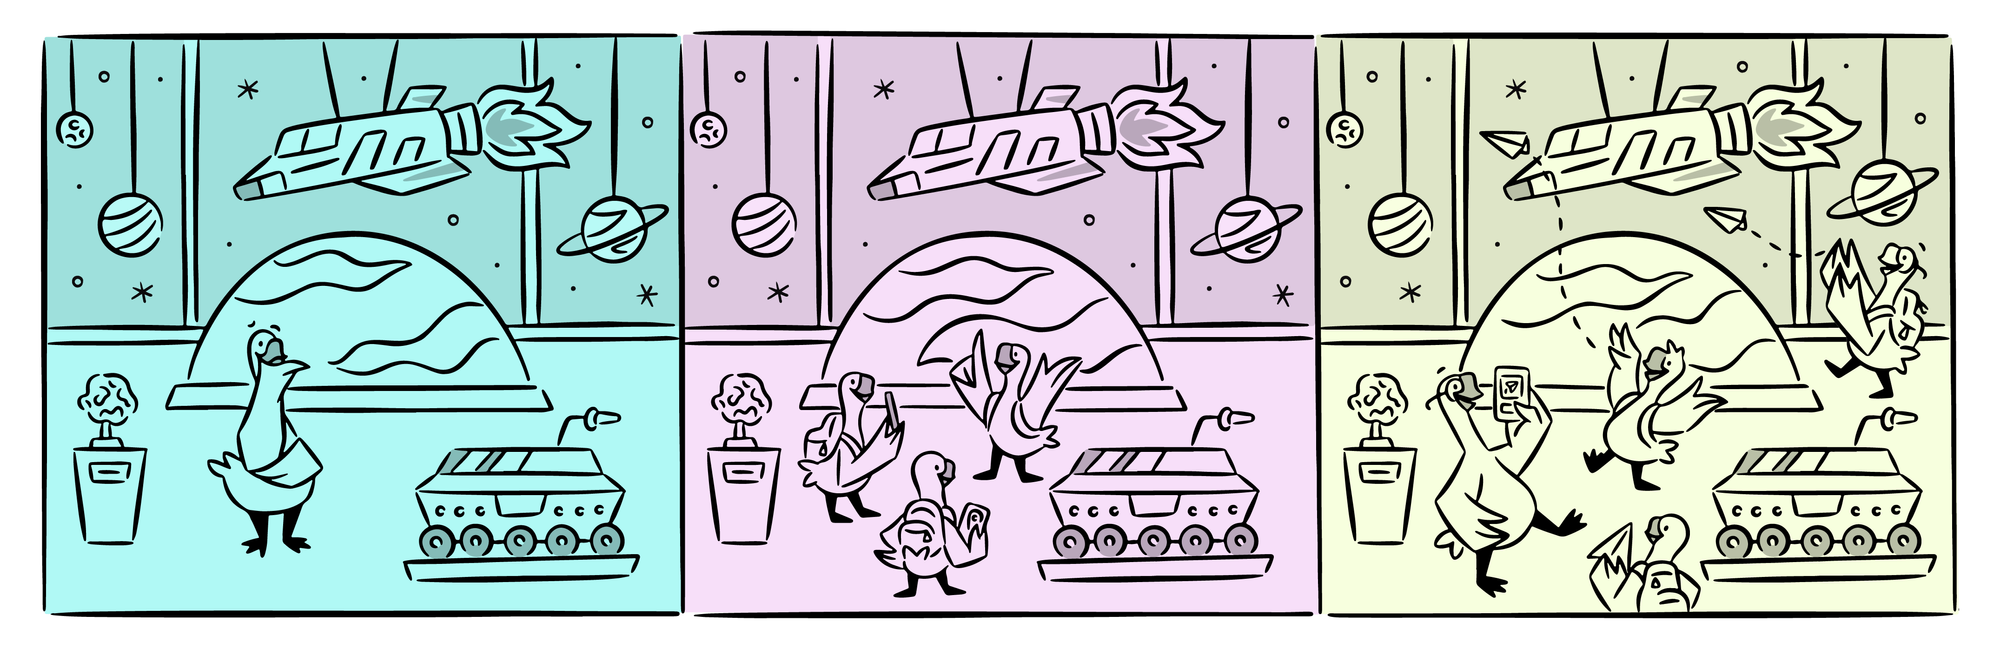 A 3-panel comic showing geese engaging in different activities at a space-themed museum